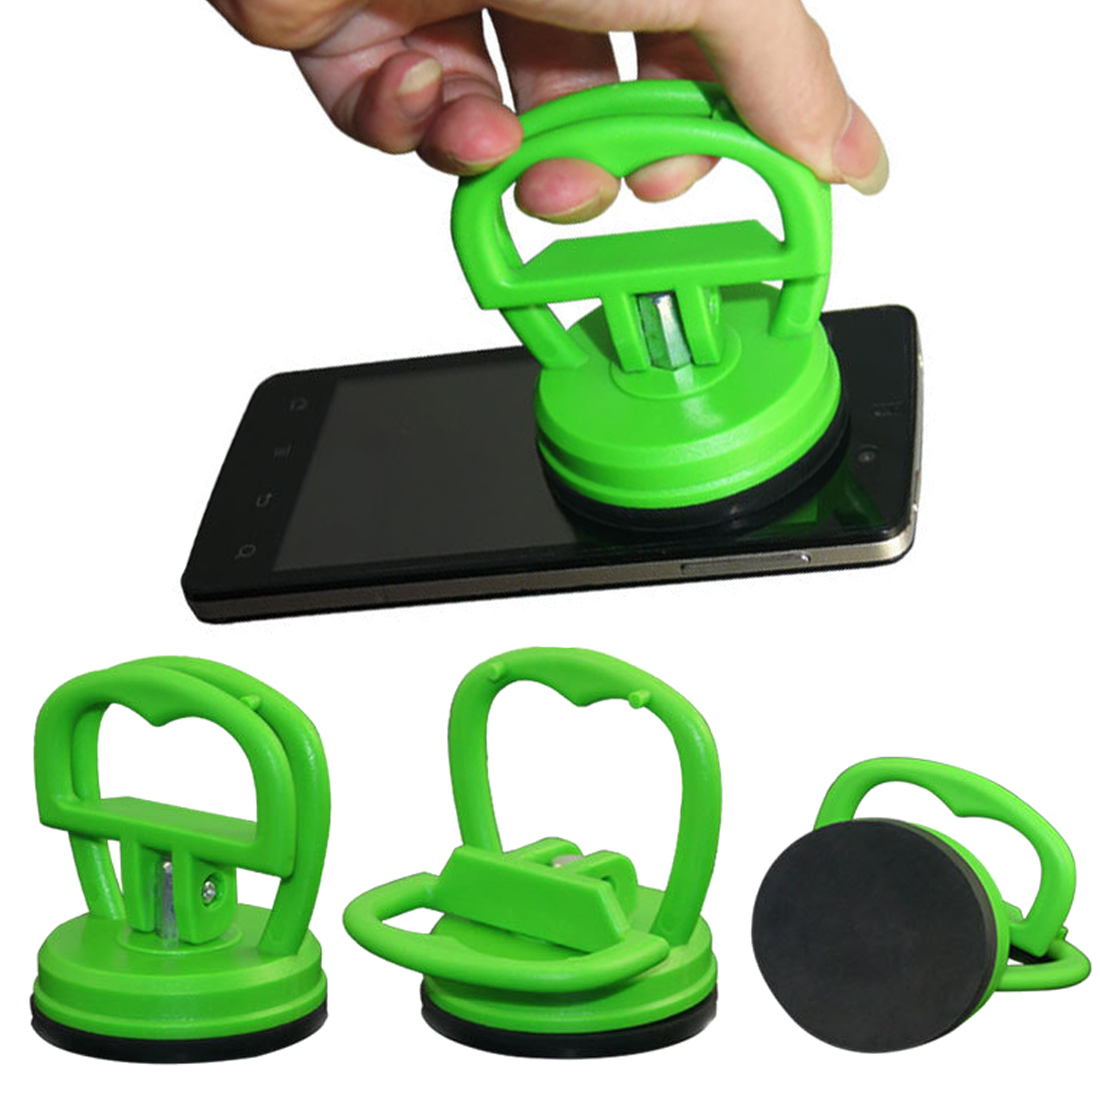 Bakeey-Universal-Disassembly-Heavy-Duty-Suction-Cup-Smart-Phone-Repair-Tool-for-iPhone-Cell-Phone-LC-1630287-3